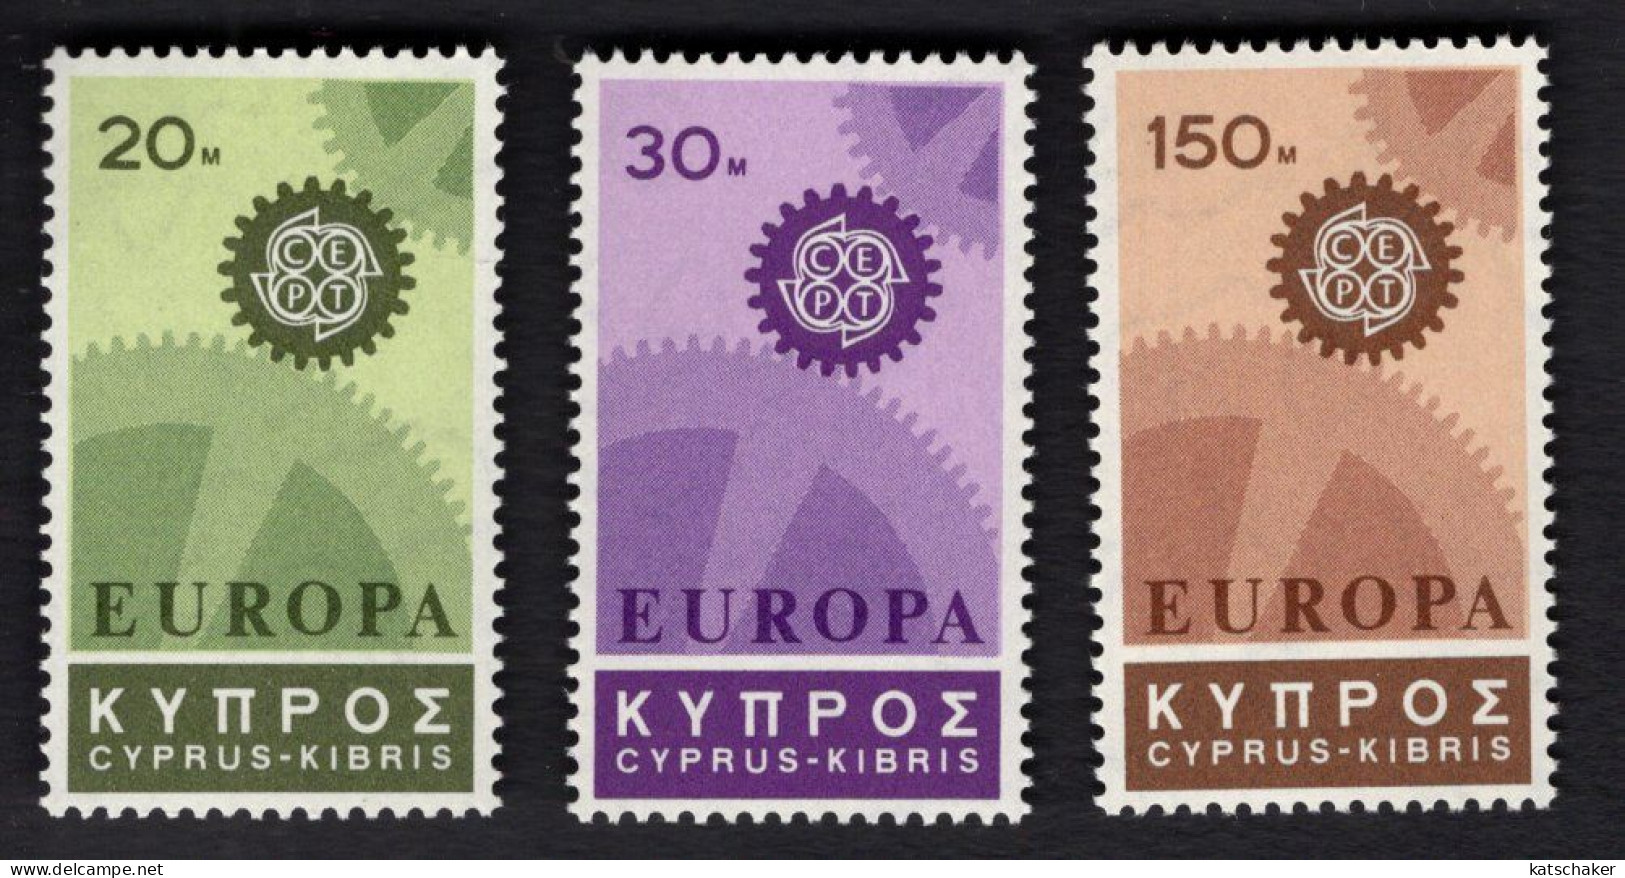 2024597135 1967 SCOTT 297 299 (XX) POSTFRIS MINT NEVER HINGED - EUROPA ISSUE - Unused Stamps